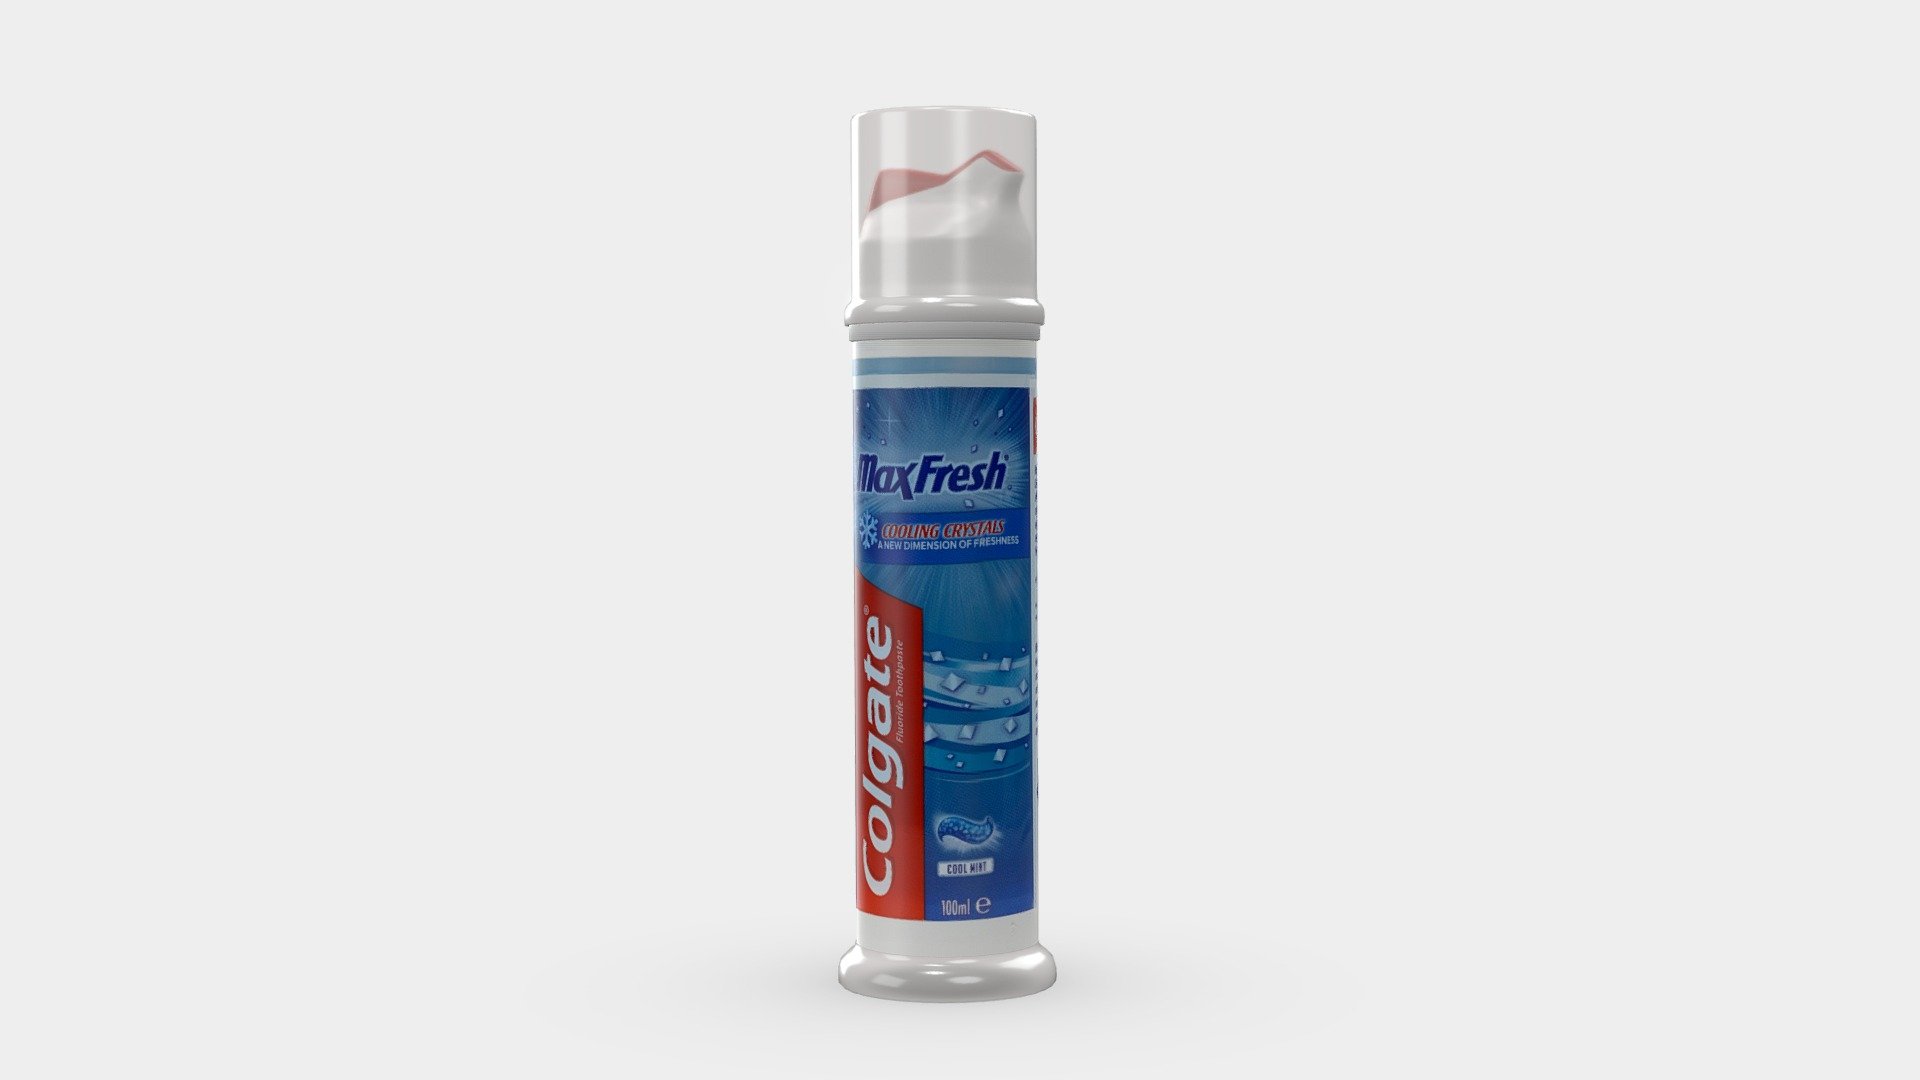 Colgate Max Fresh Cooling Crystals Toothpaste 100 ml
VR and game ready for high quality Architectural Visualization
EAN: 8714789294353 - COLGATE - Max Fresh Toothpaste - 3D model by Invrsion 3d model